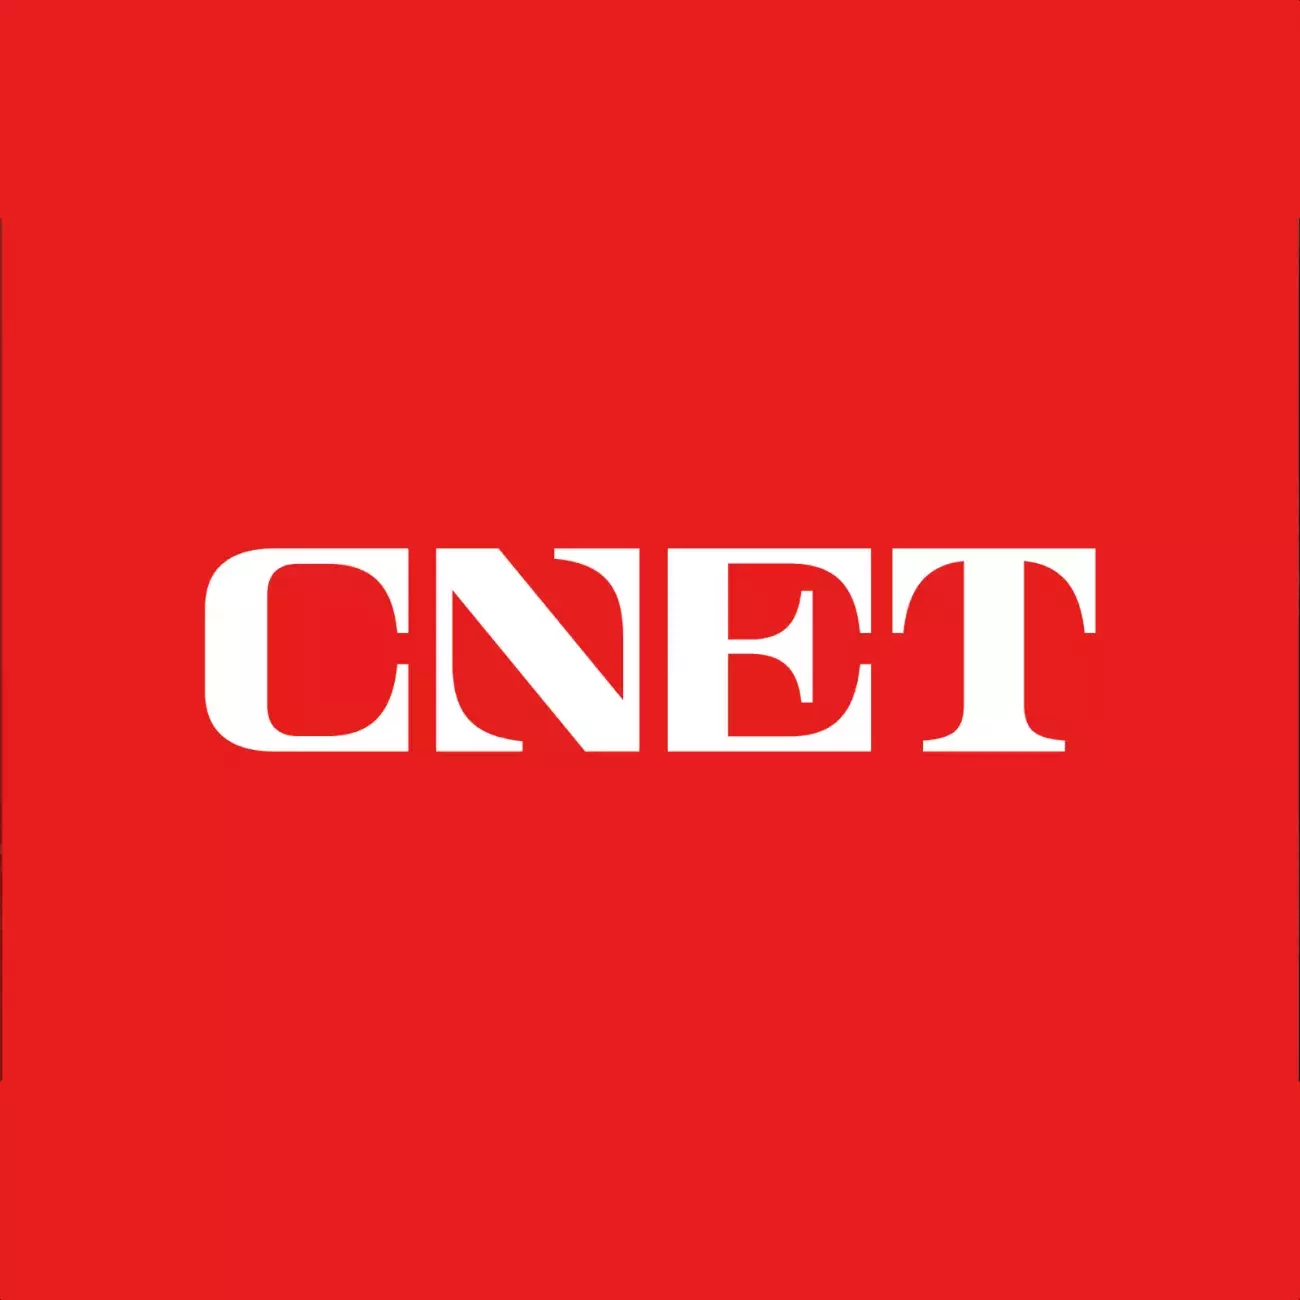 COLLINS modernizes CNET beyond tech with editorial-first reimagined brand identity